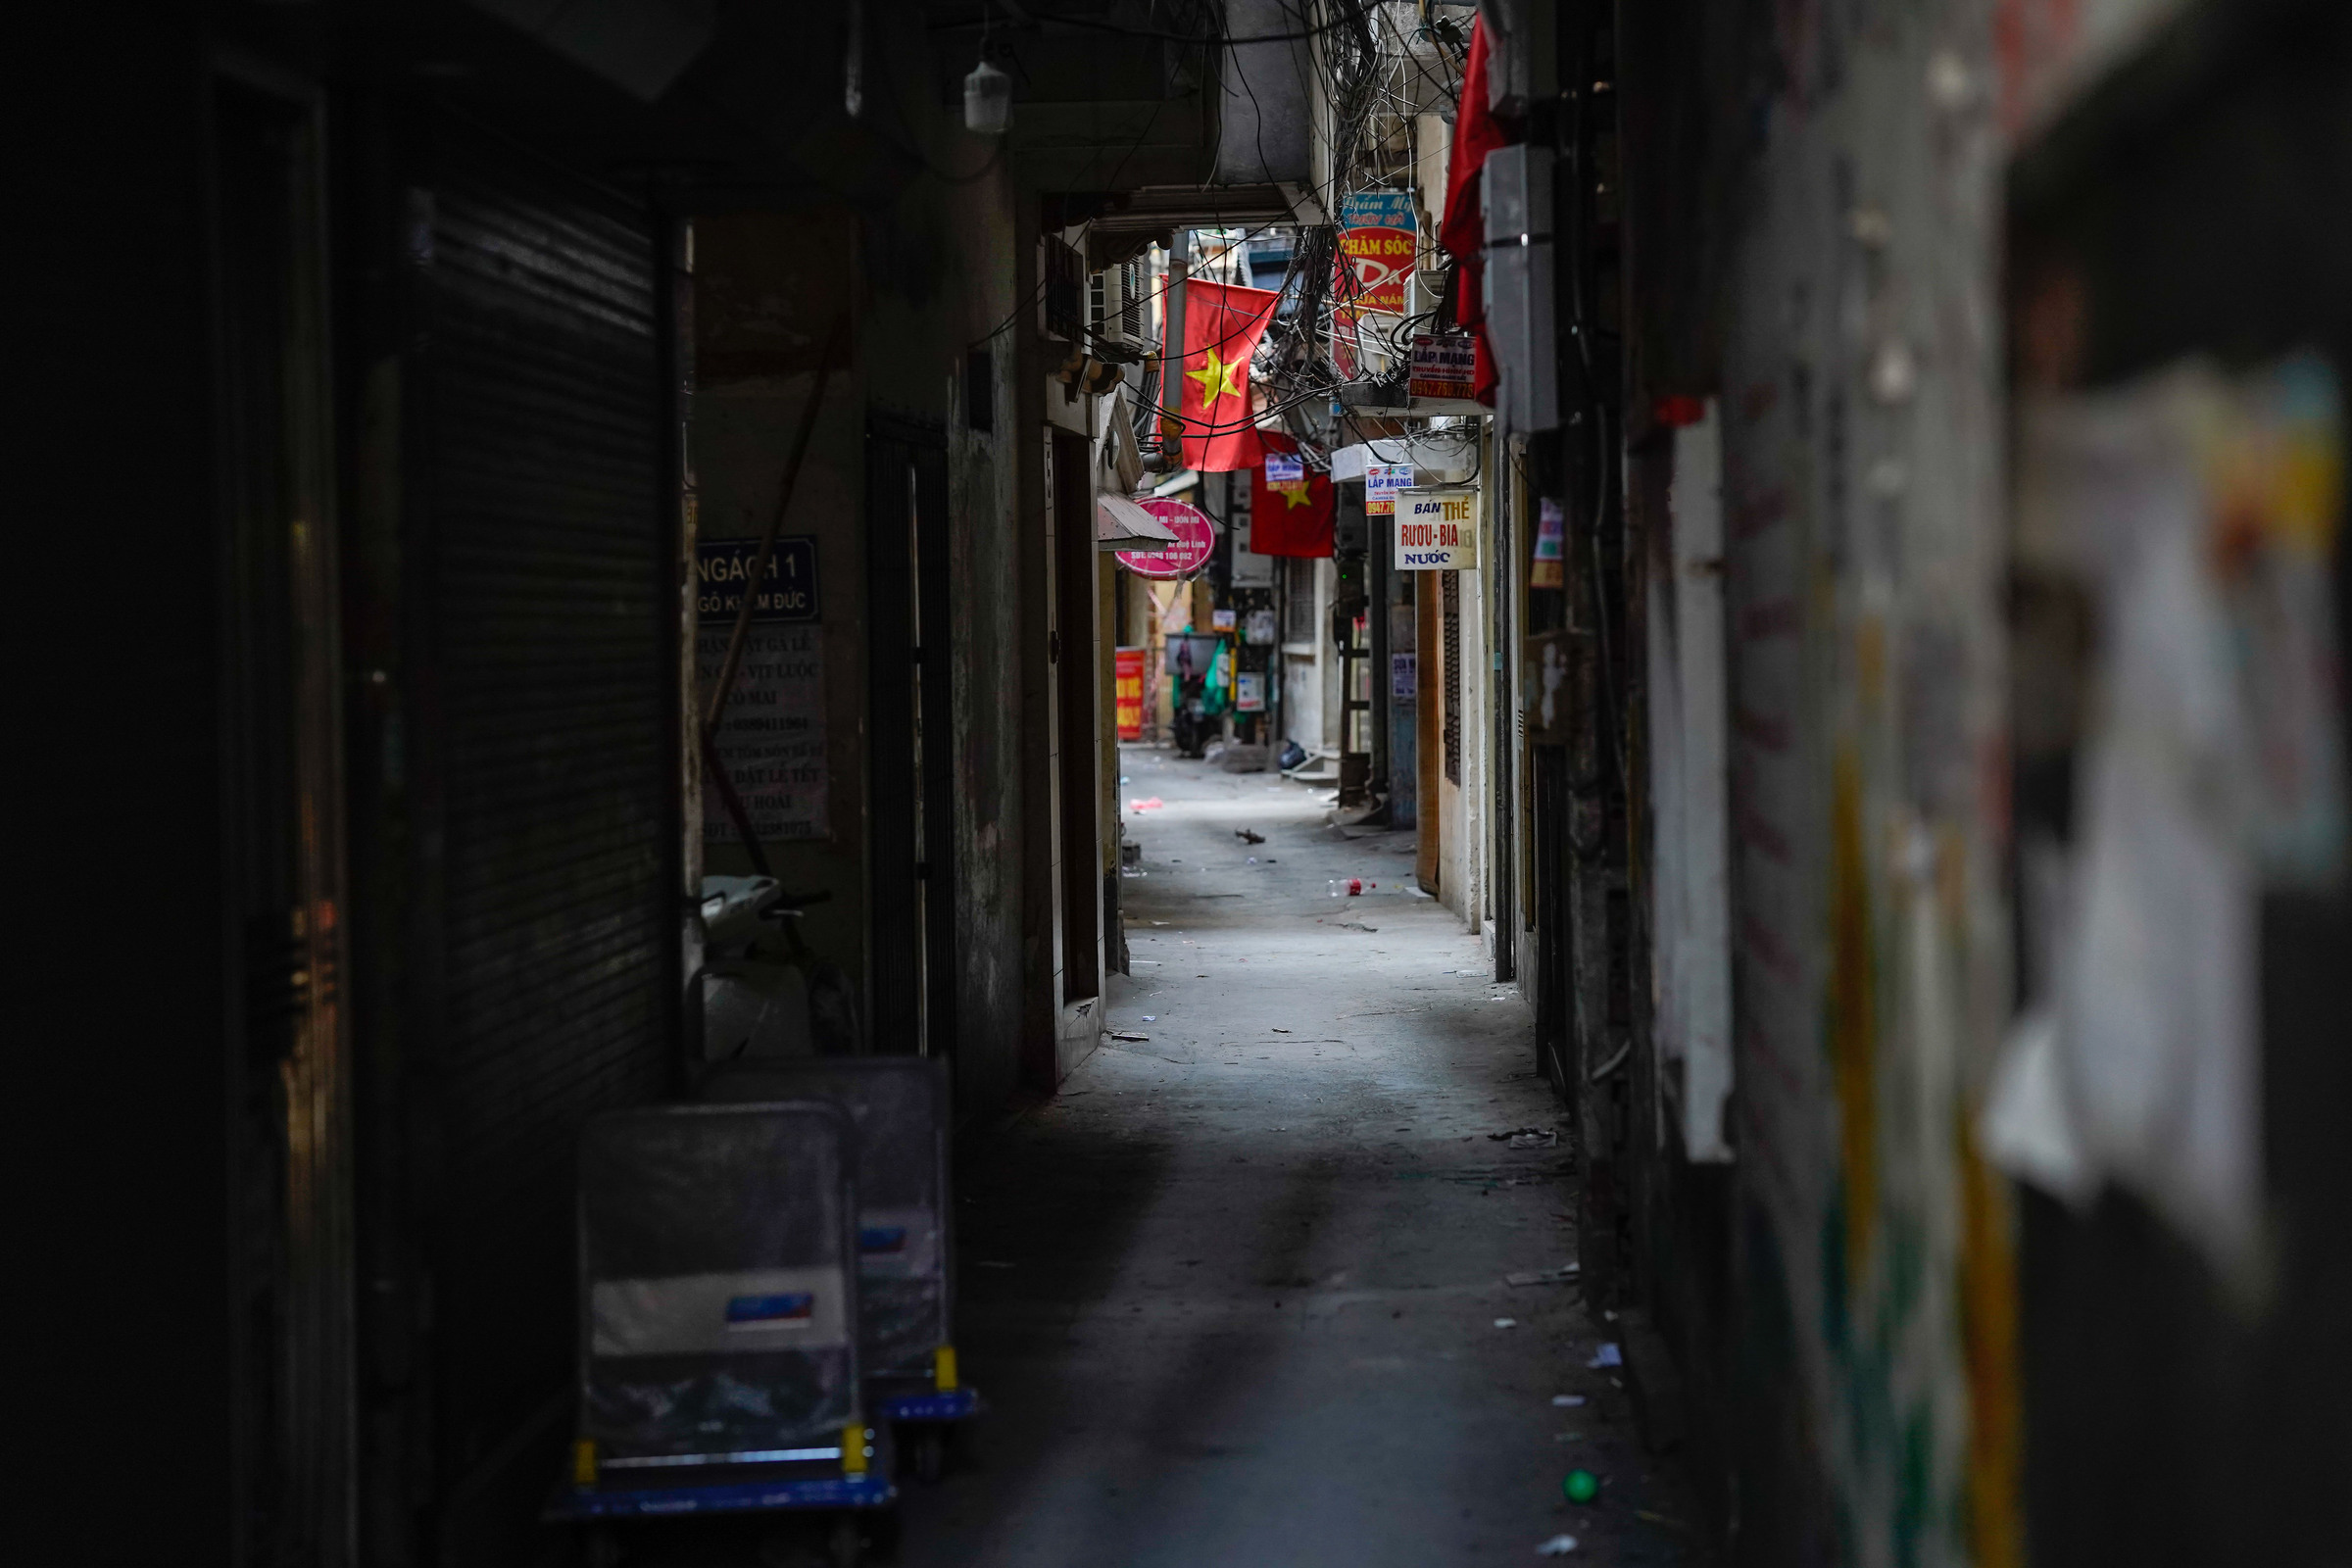 An alley under Covid-19 lockdown in Hanoi, December 1, 2021. Photo by VnExpress/Pham Chieu